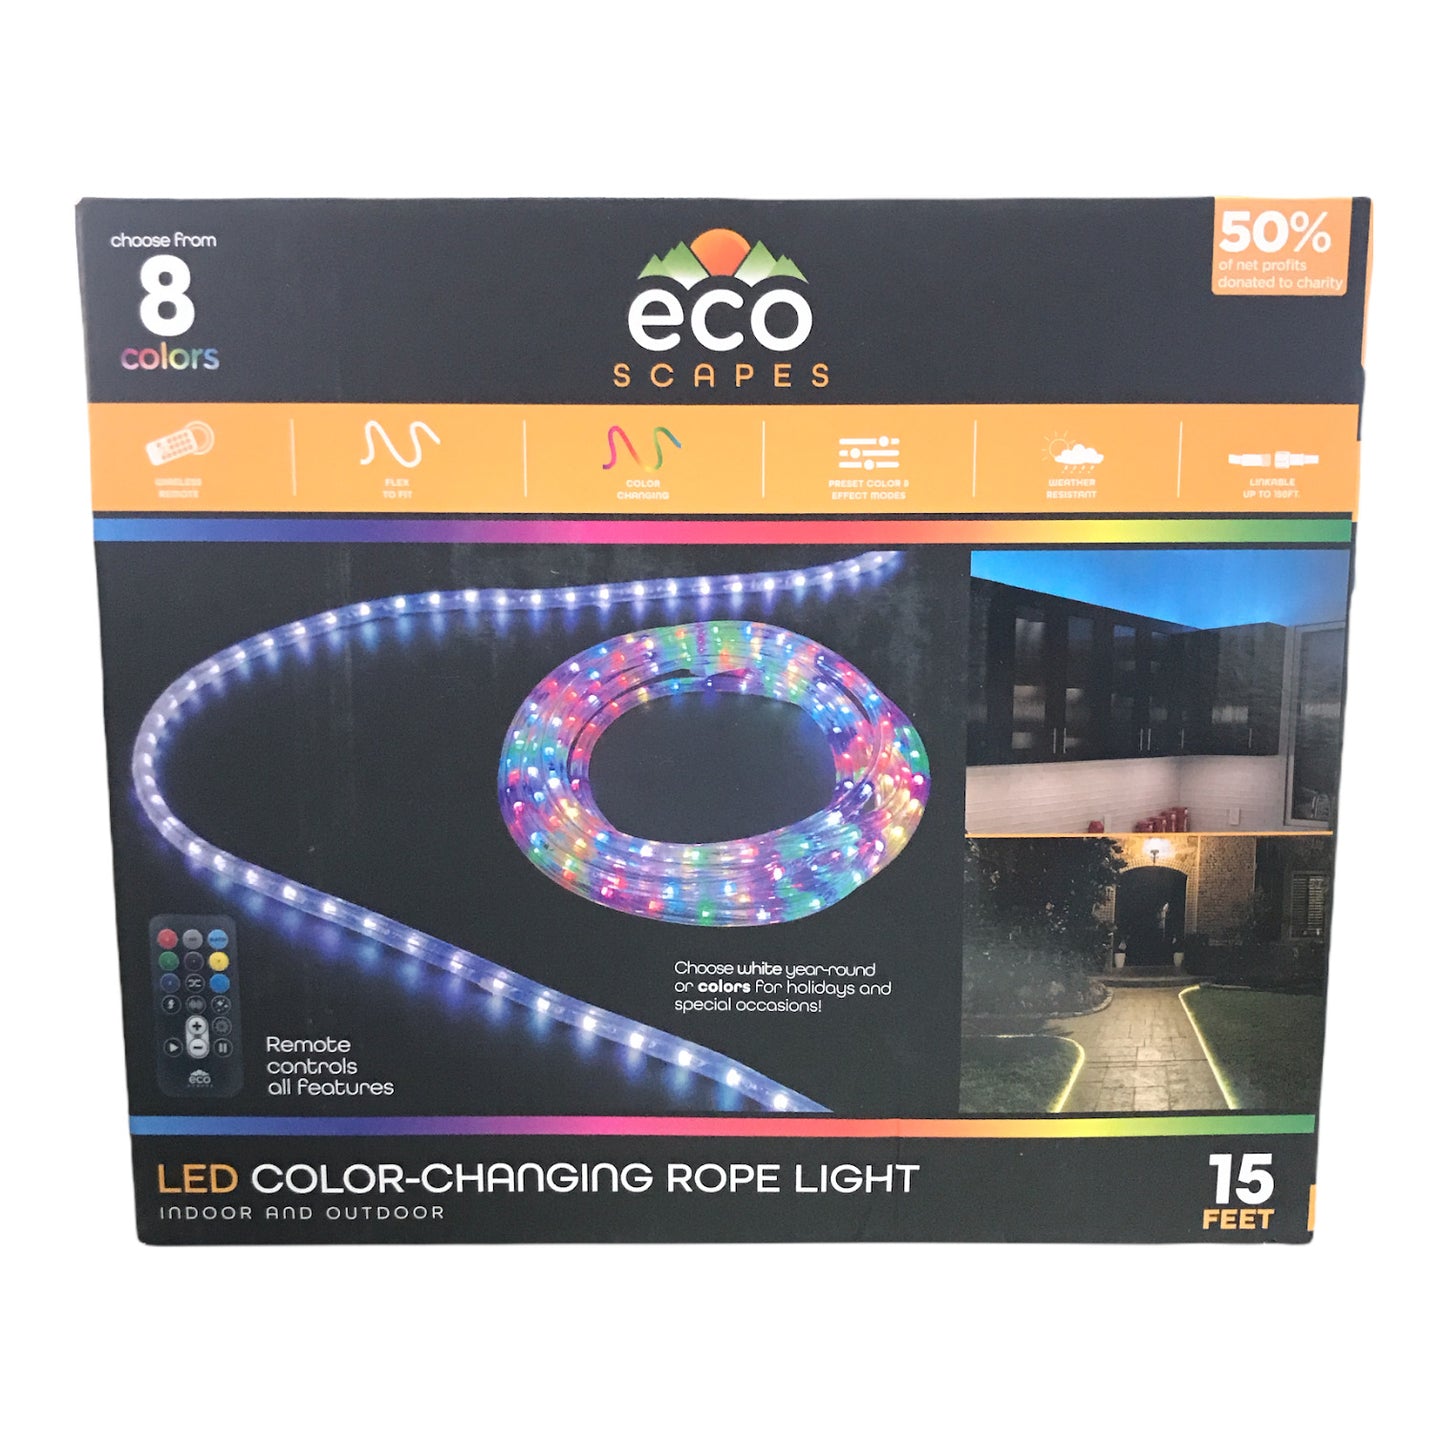 EcoScapes LED Color-Changing 15' Rope Light with Remote, Linkable Indoor/Outdoor